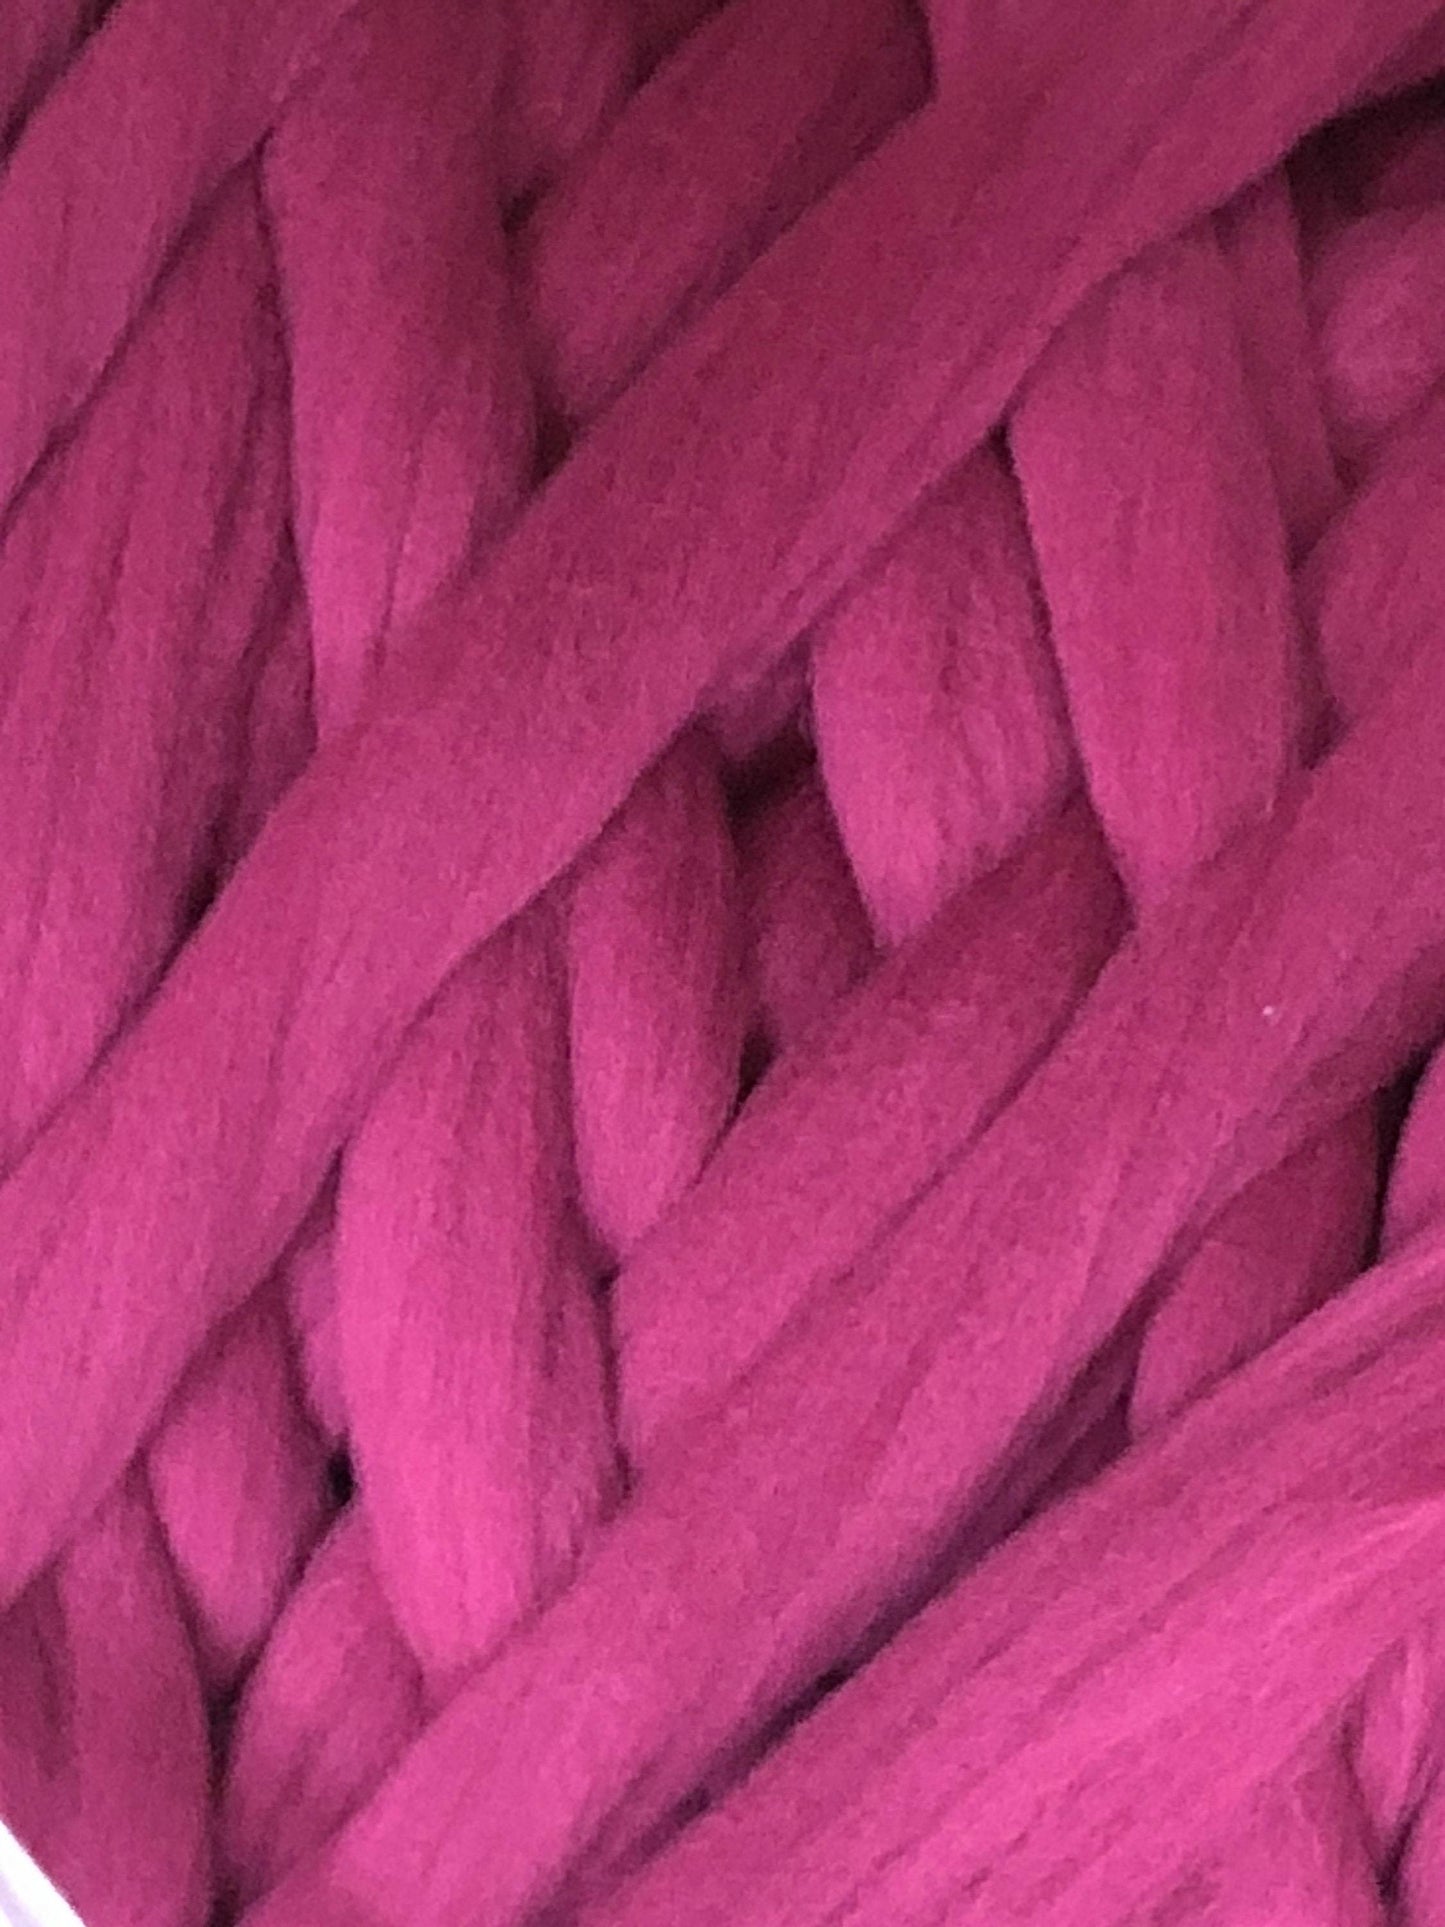 Clearance Wool Roving Bulk - Wool Chunky Yarn, Wool Roving Top for Needle  Felting, Soft Felting Wool Supplies for Hand Spinning, Felting, Blending